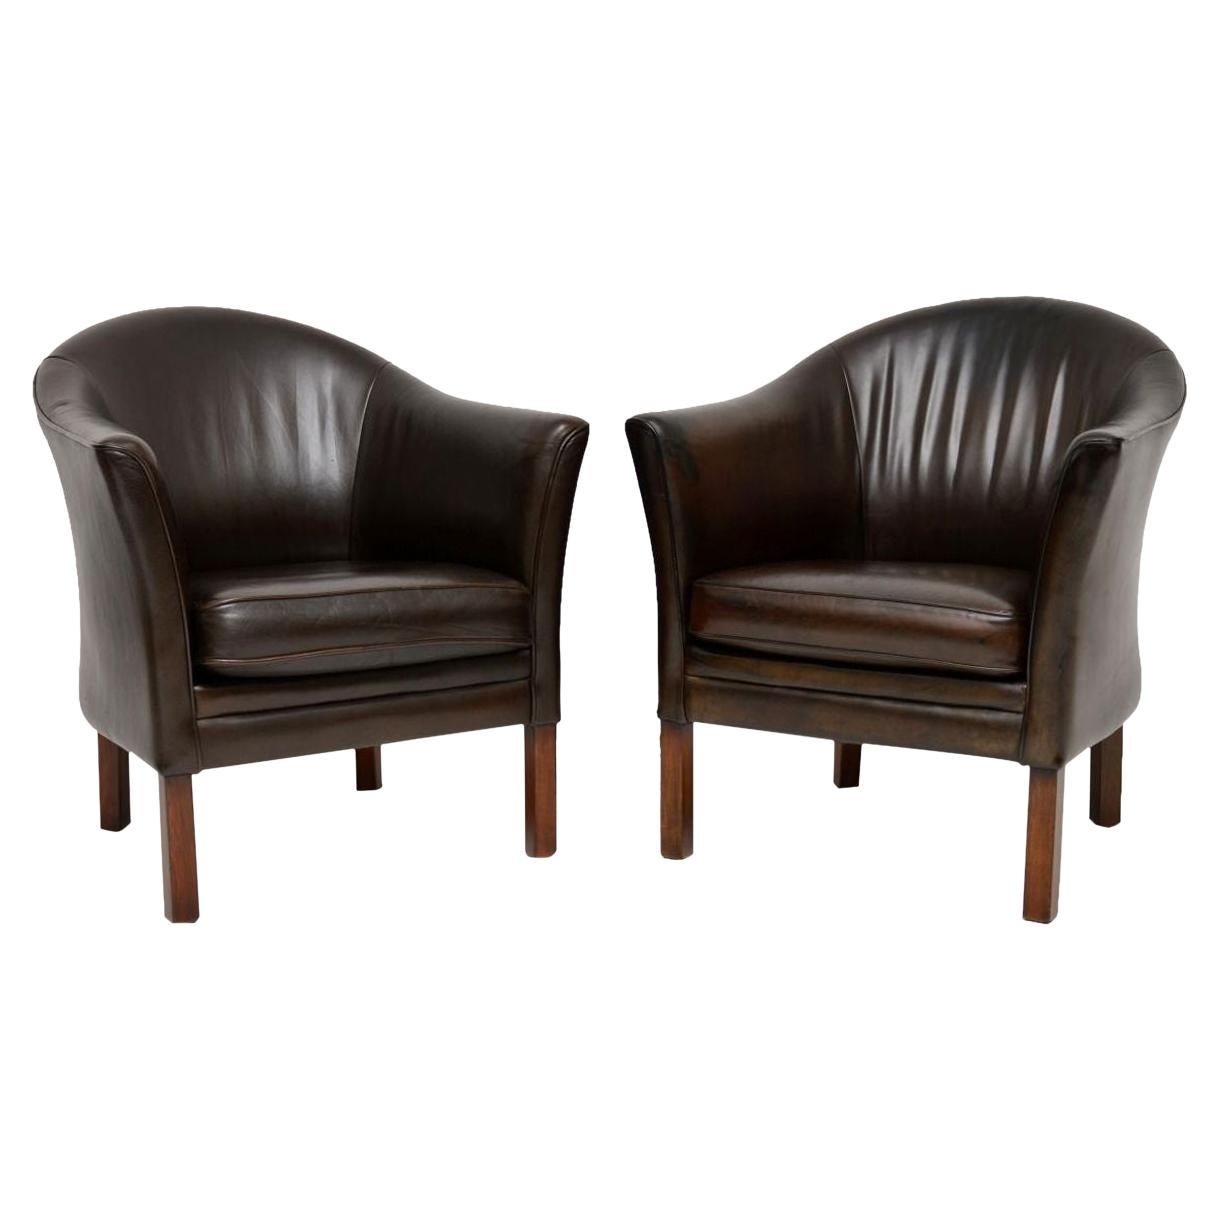 1960s Pair of Danish Vintage Leather Armchairs by Mogens Hansen